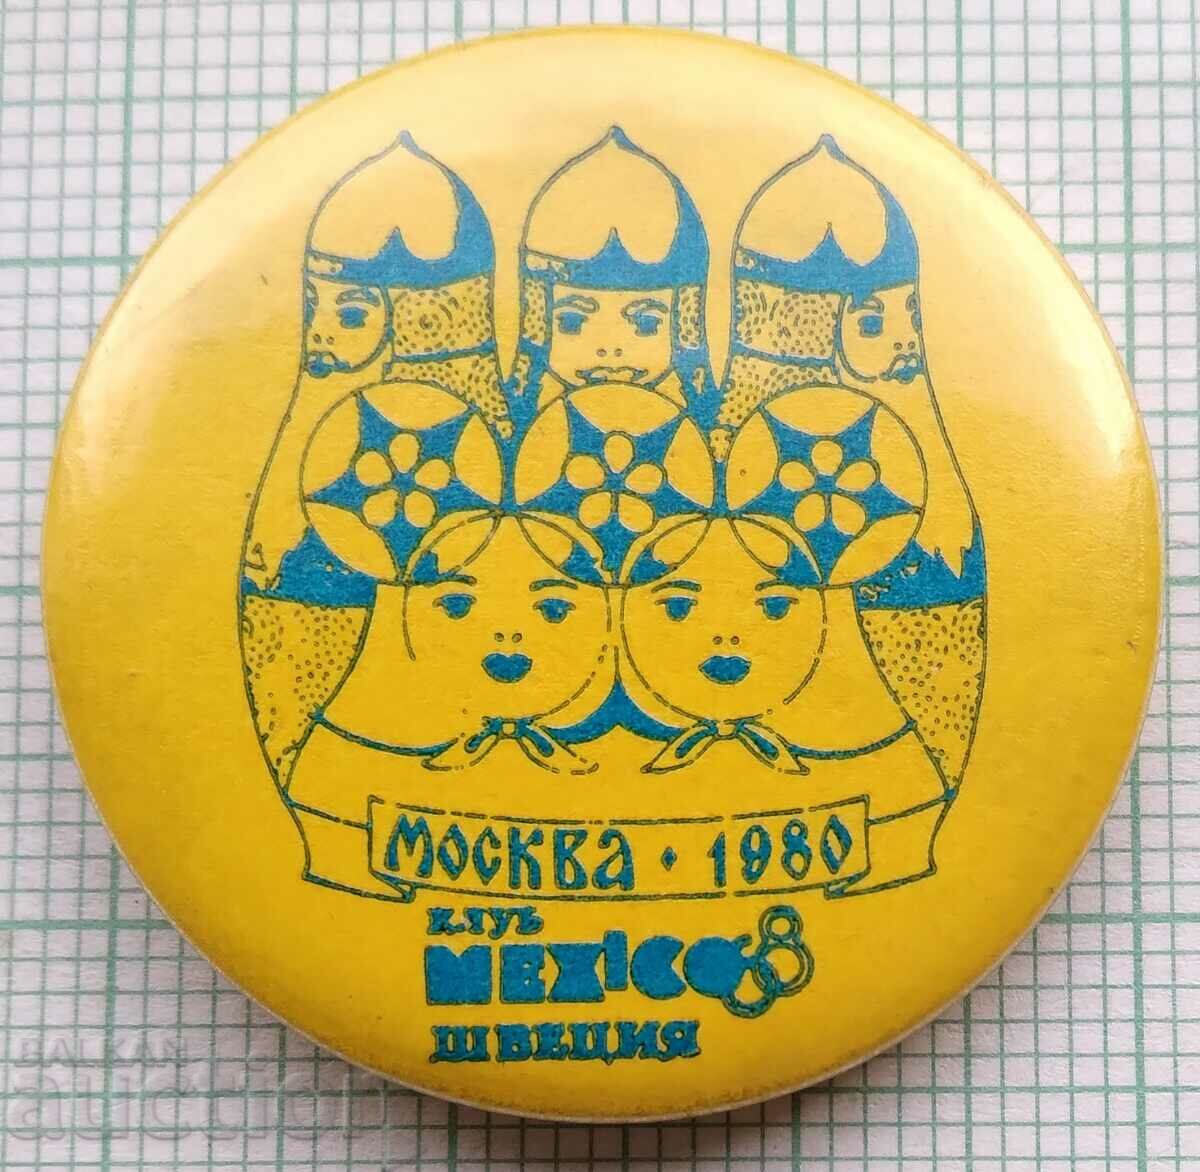 11916 Badge - Olympics Moscow 1980